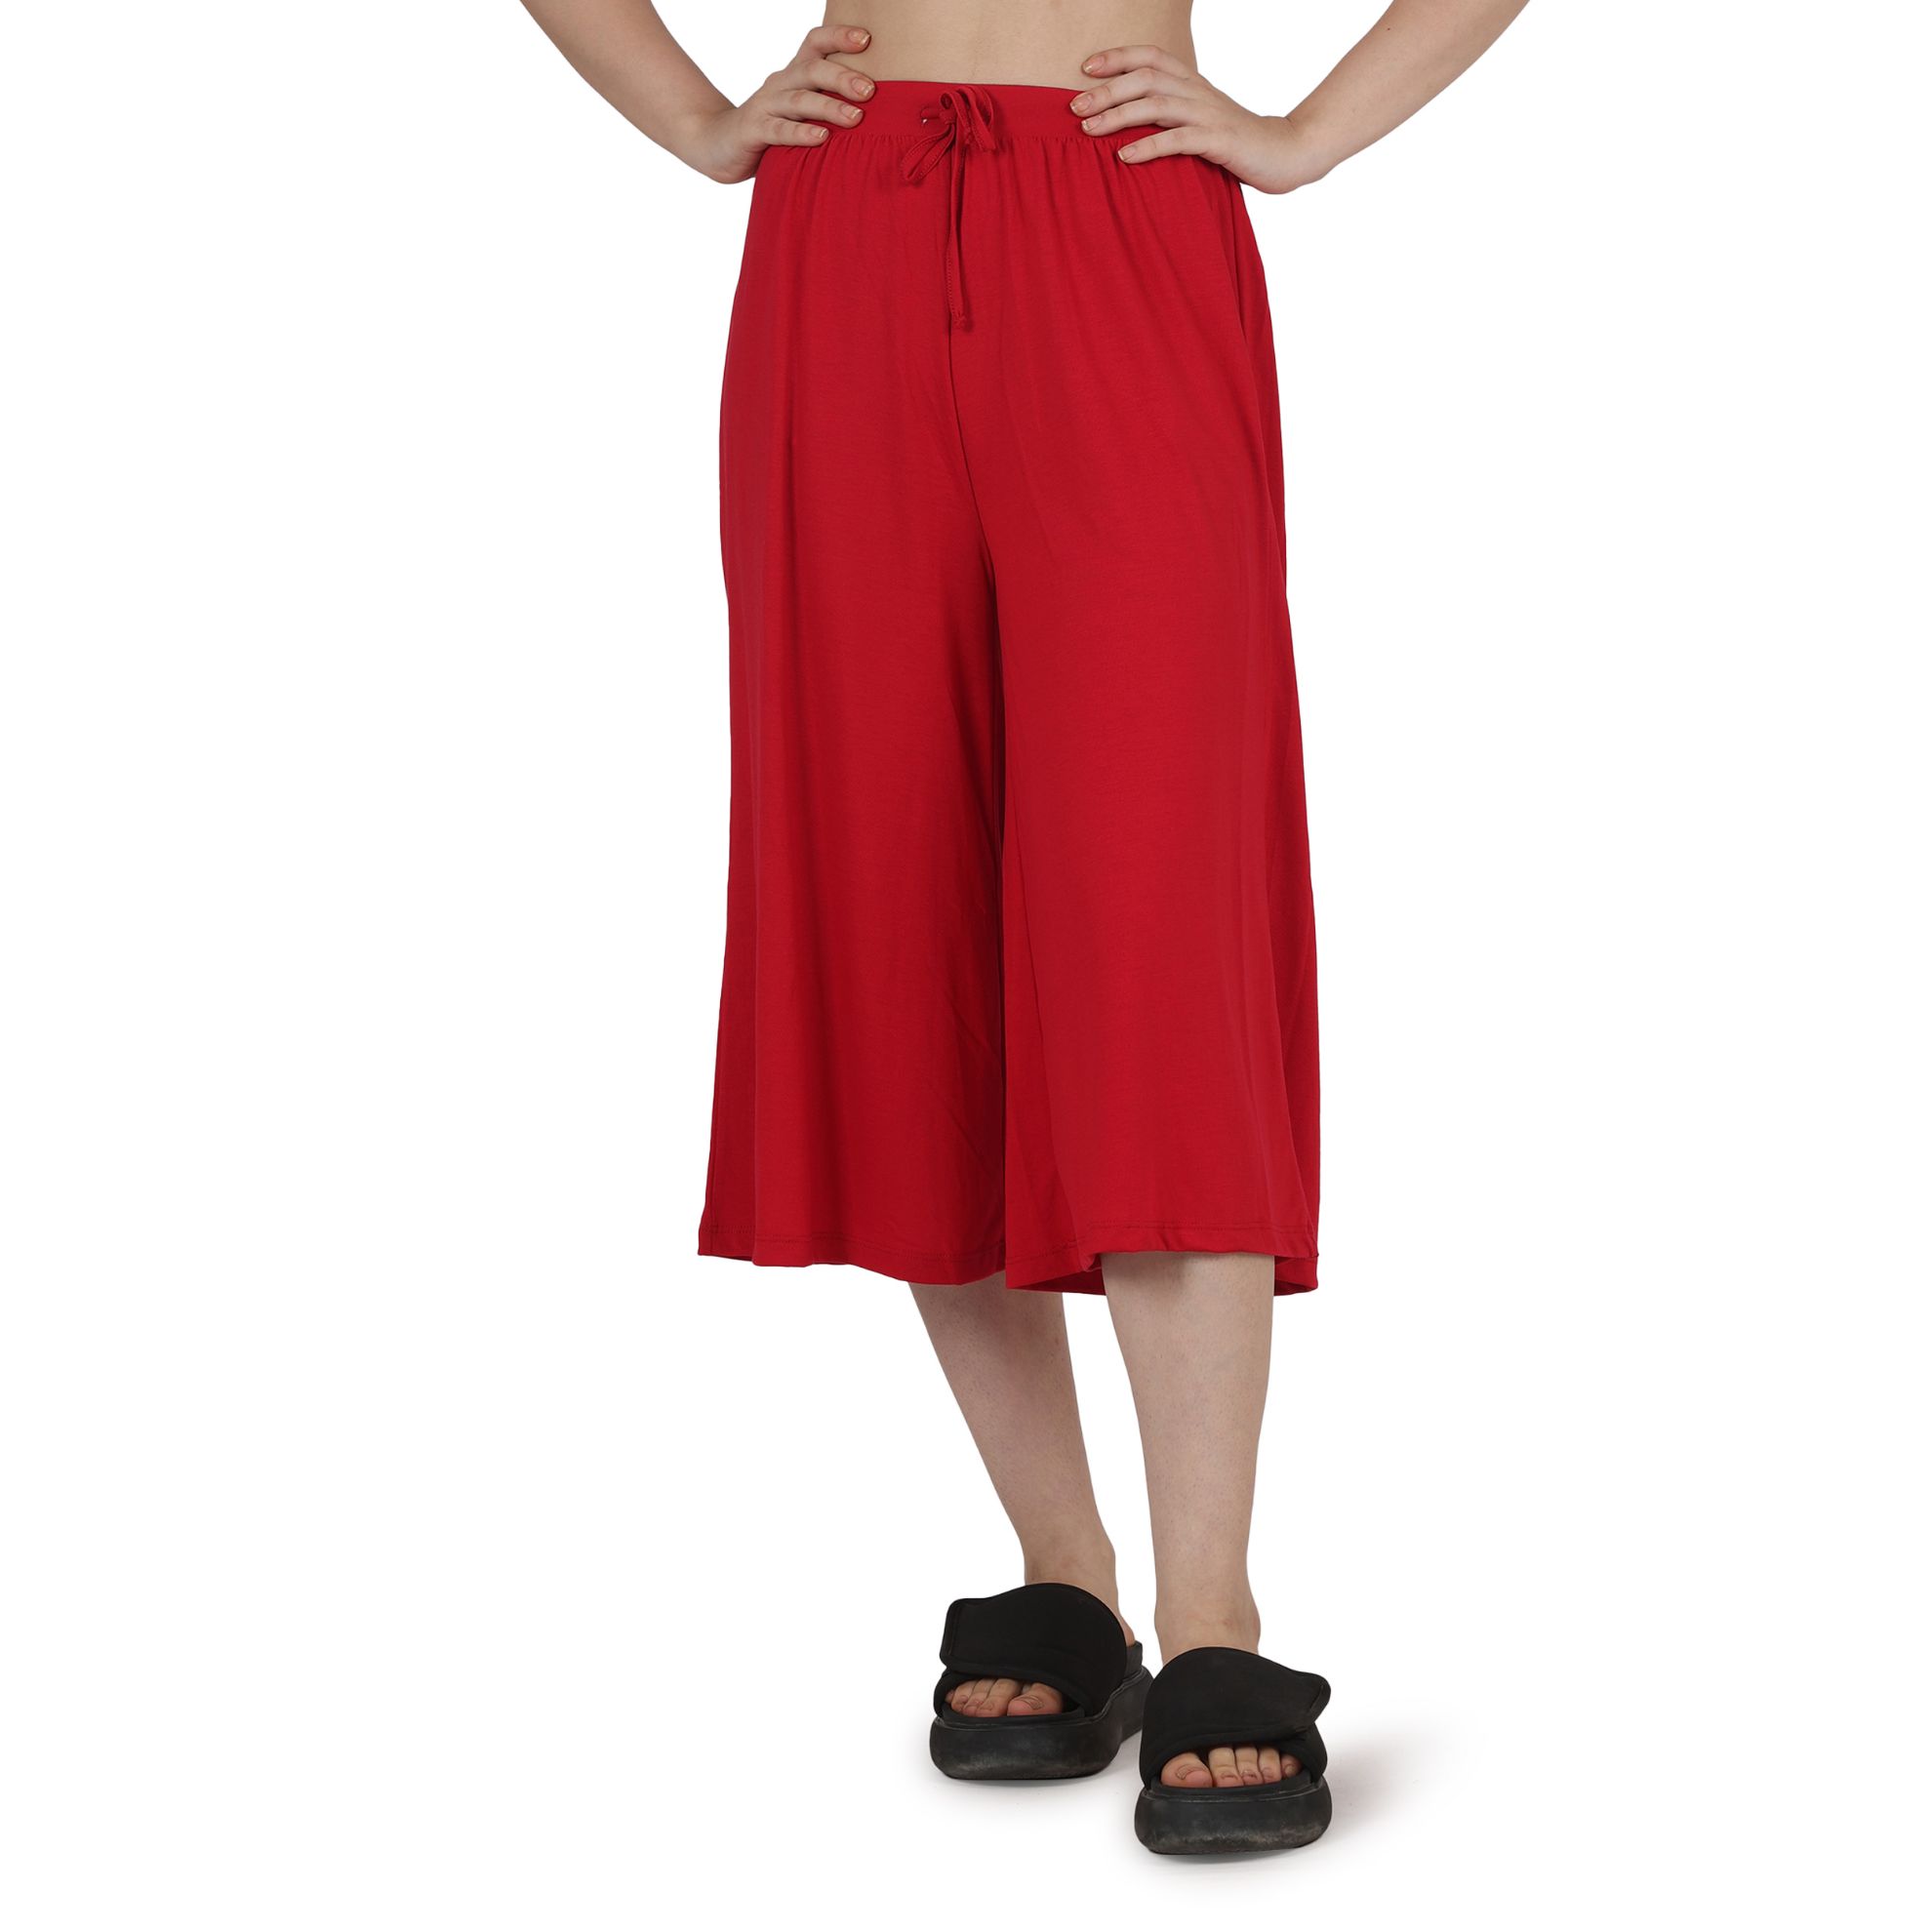 Wide Leg Palazzo Pants for Women Plus Size Cargo Shorts for Women Relaxed  Fit, Women's Solid Shorts Ruffle High Waist Pants Casual Summer Comfy  Lounge Short Casual Elastic Waist Short Pants -